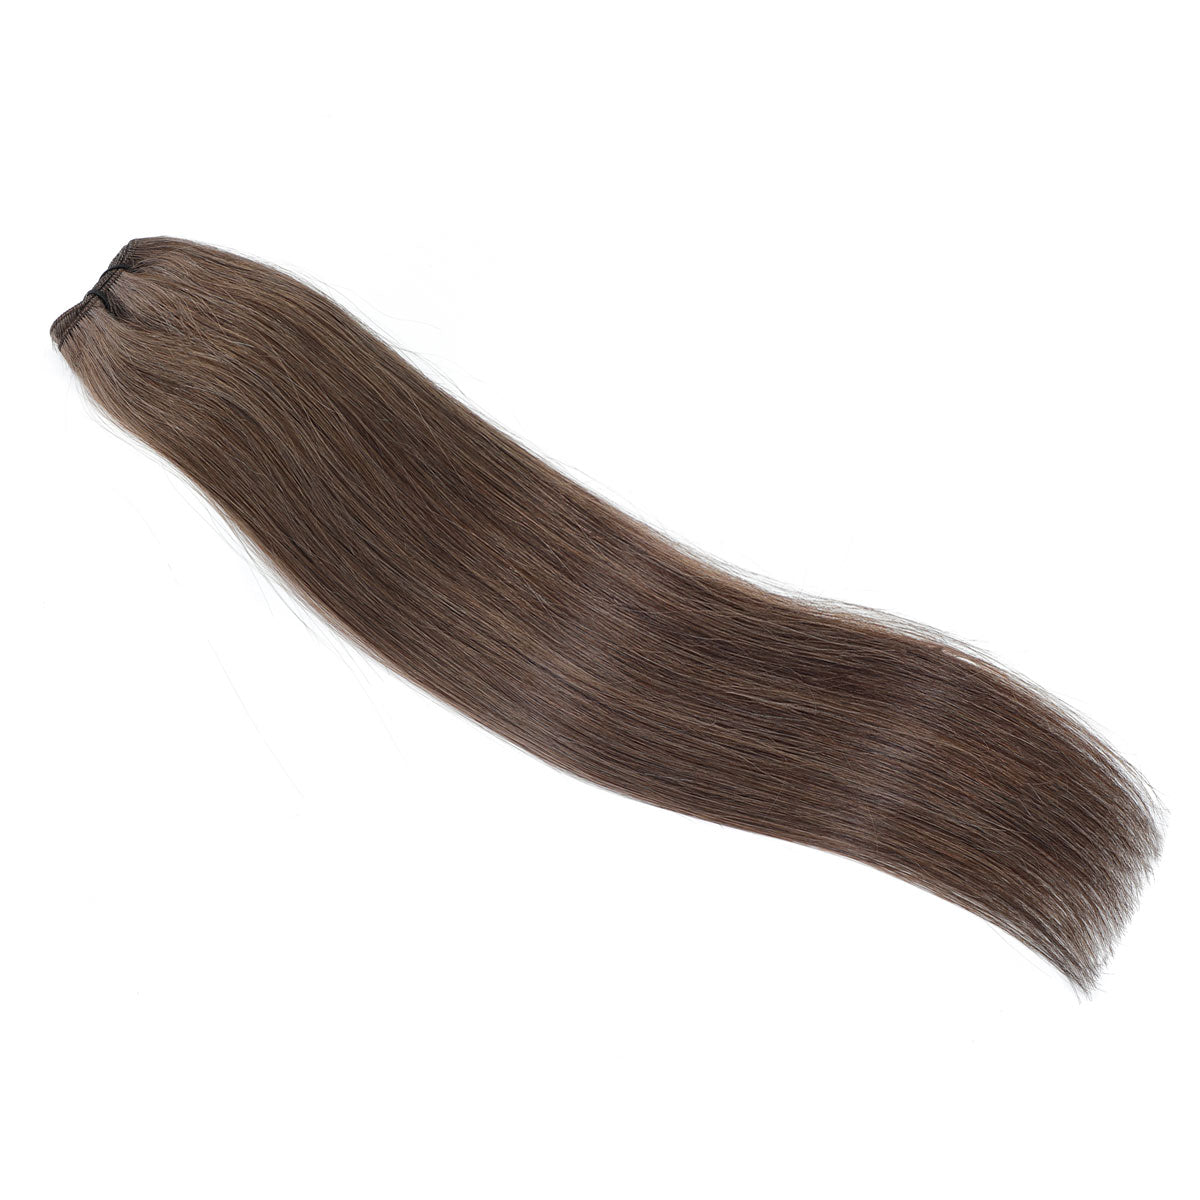 Great way to add length and volume with these bundle wefts